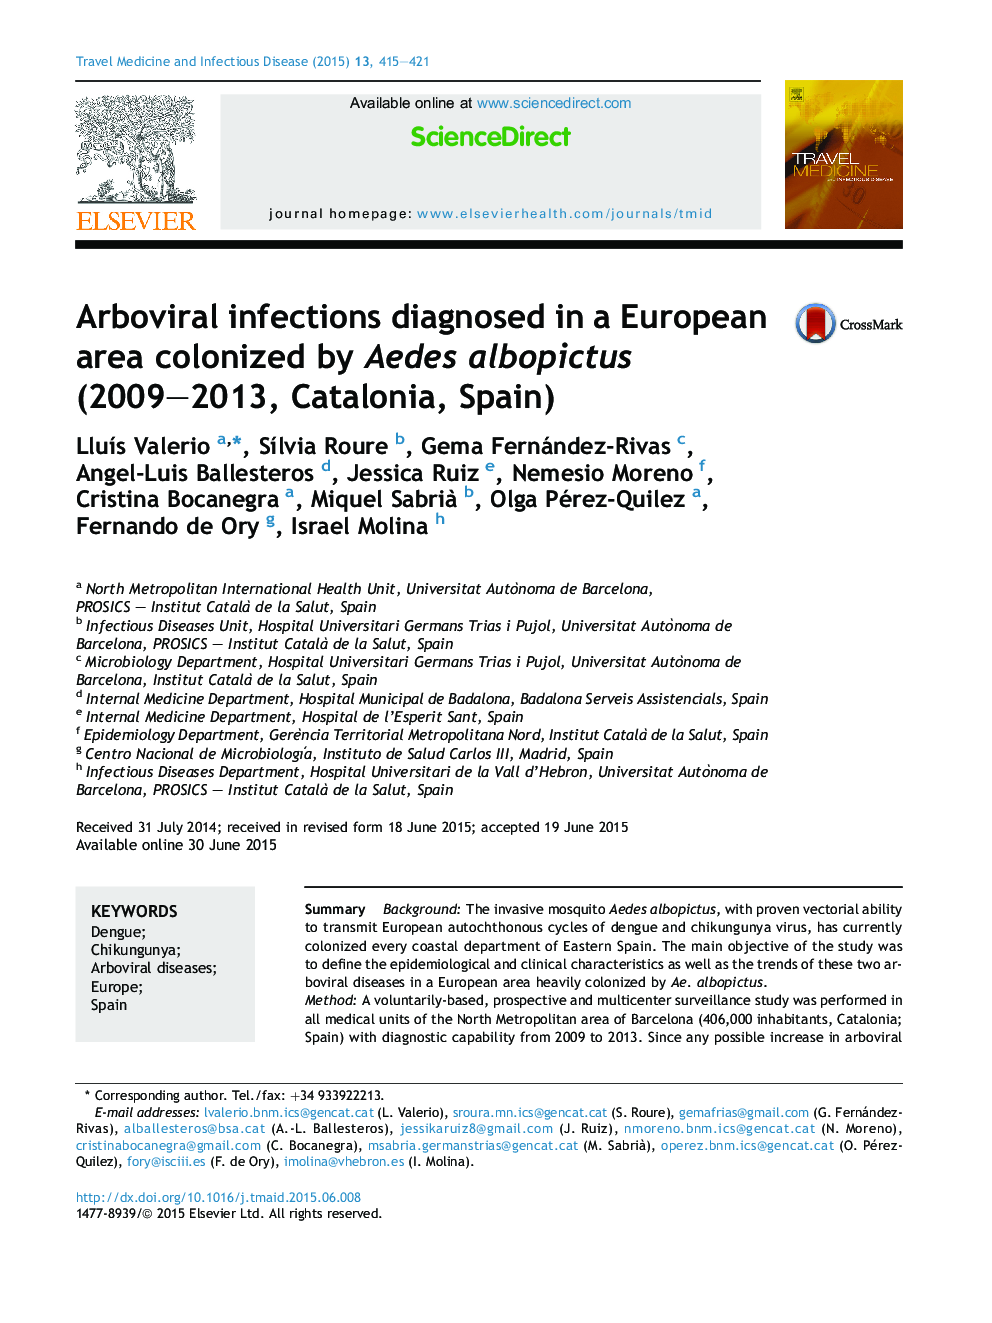 Arboviral infections diagnosed in a European area colonized by Aedes albopictus (2009–2013, Catalonia, Spain)